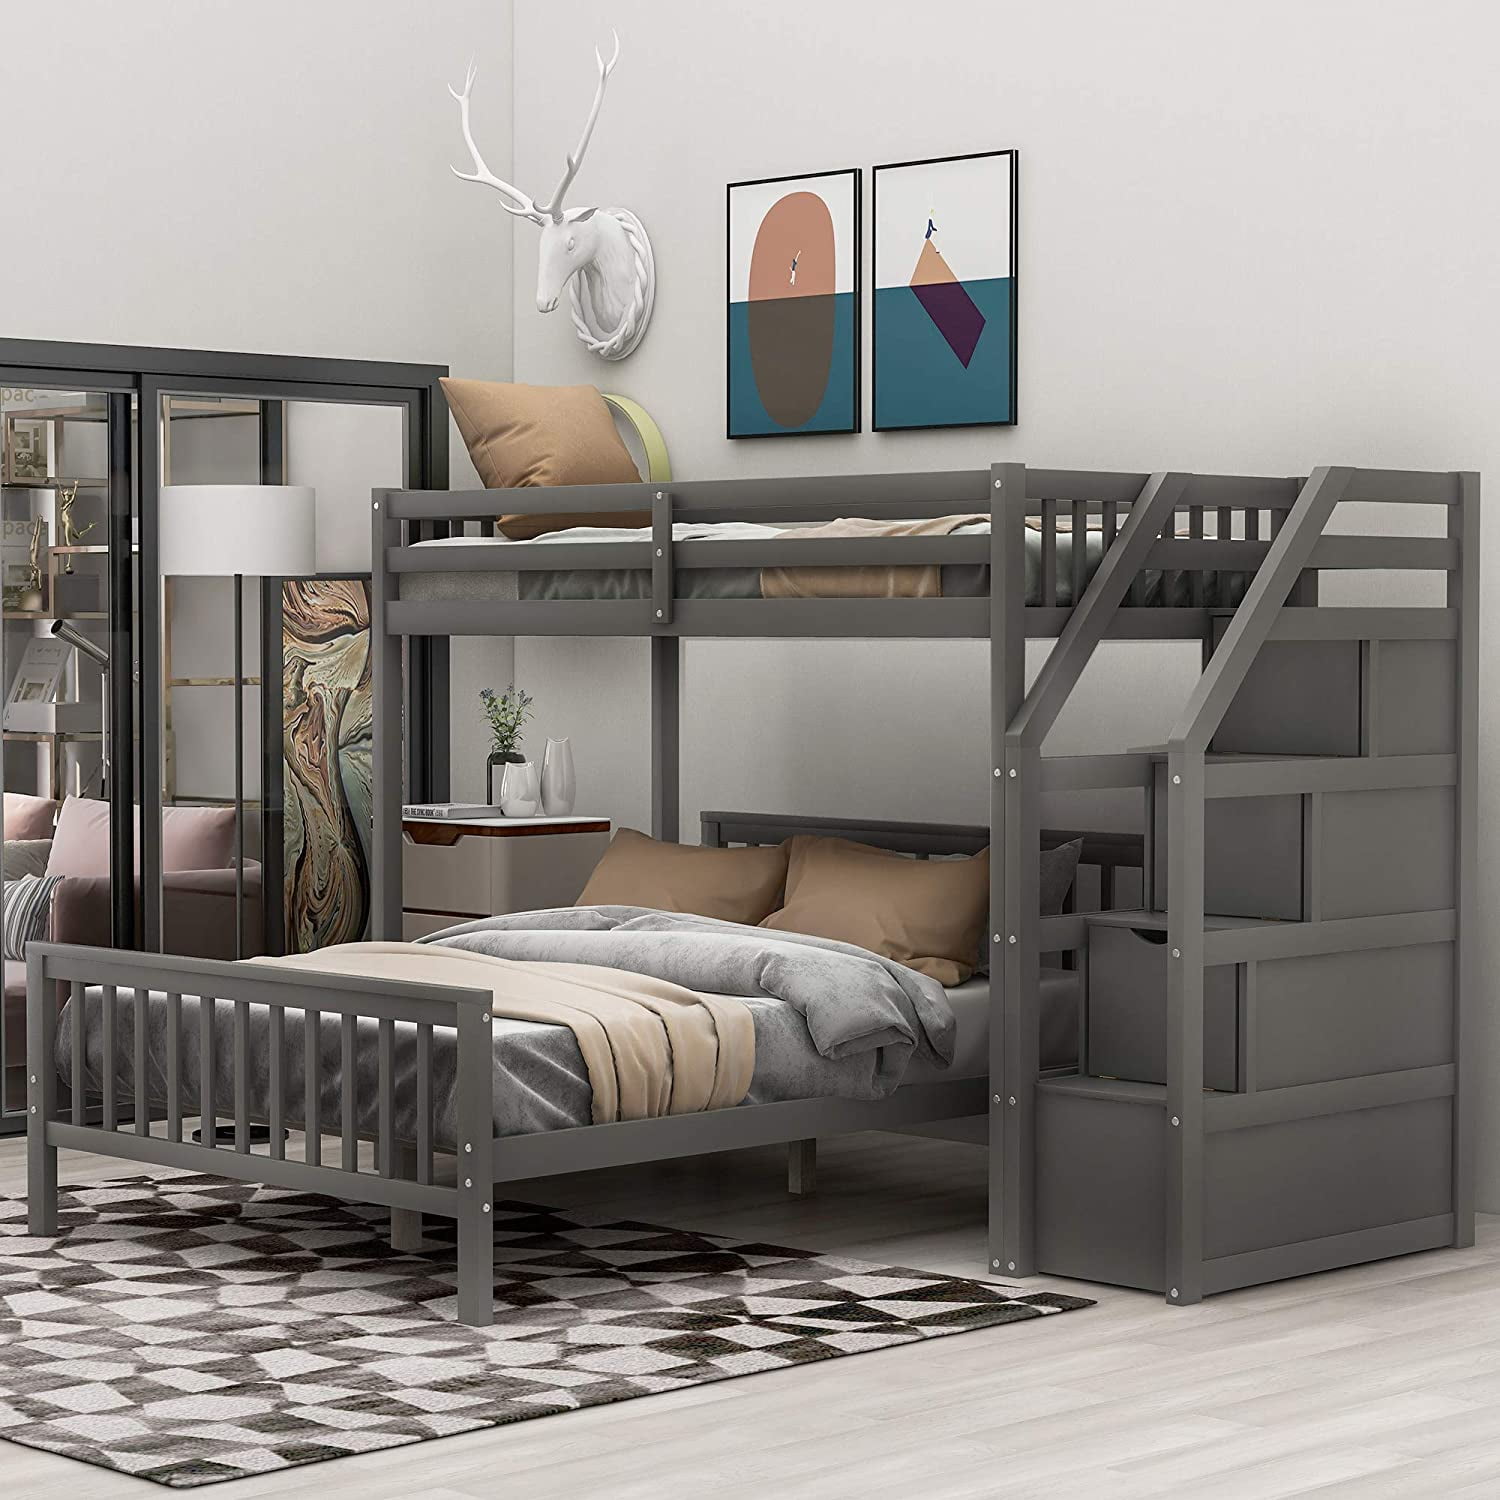 Twin Over Full Loft Beds Bunk, Twin Over Full Bunk Bed With Mattress Included